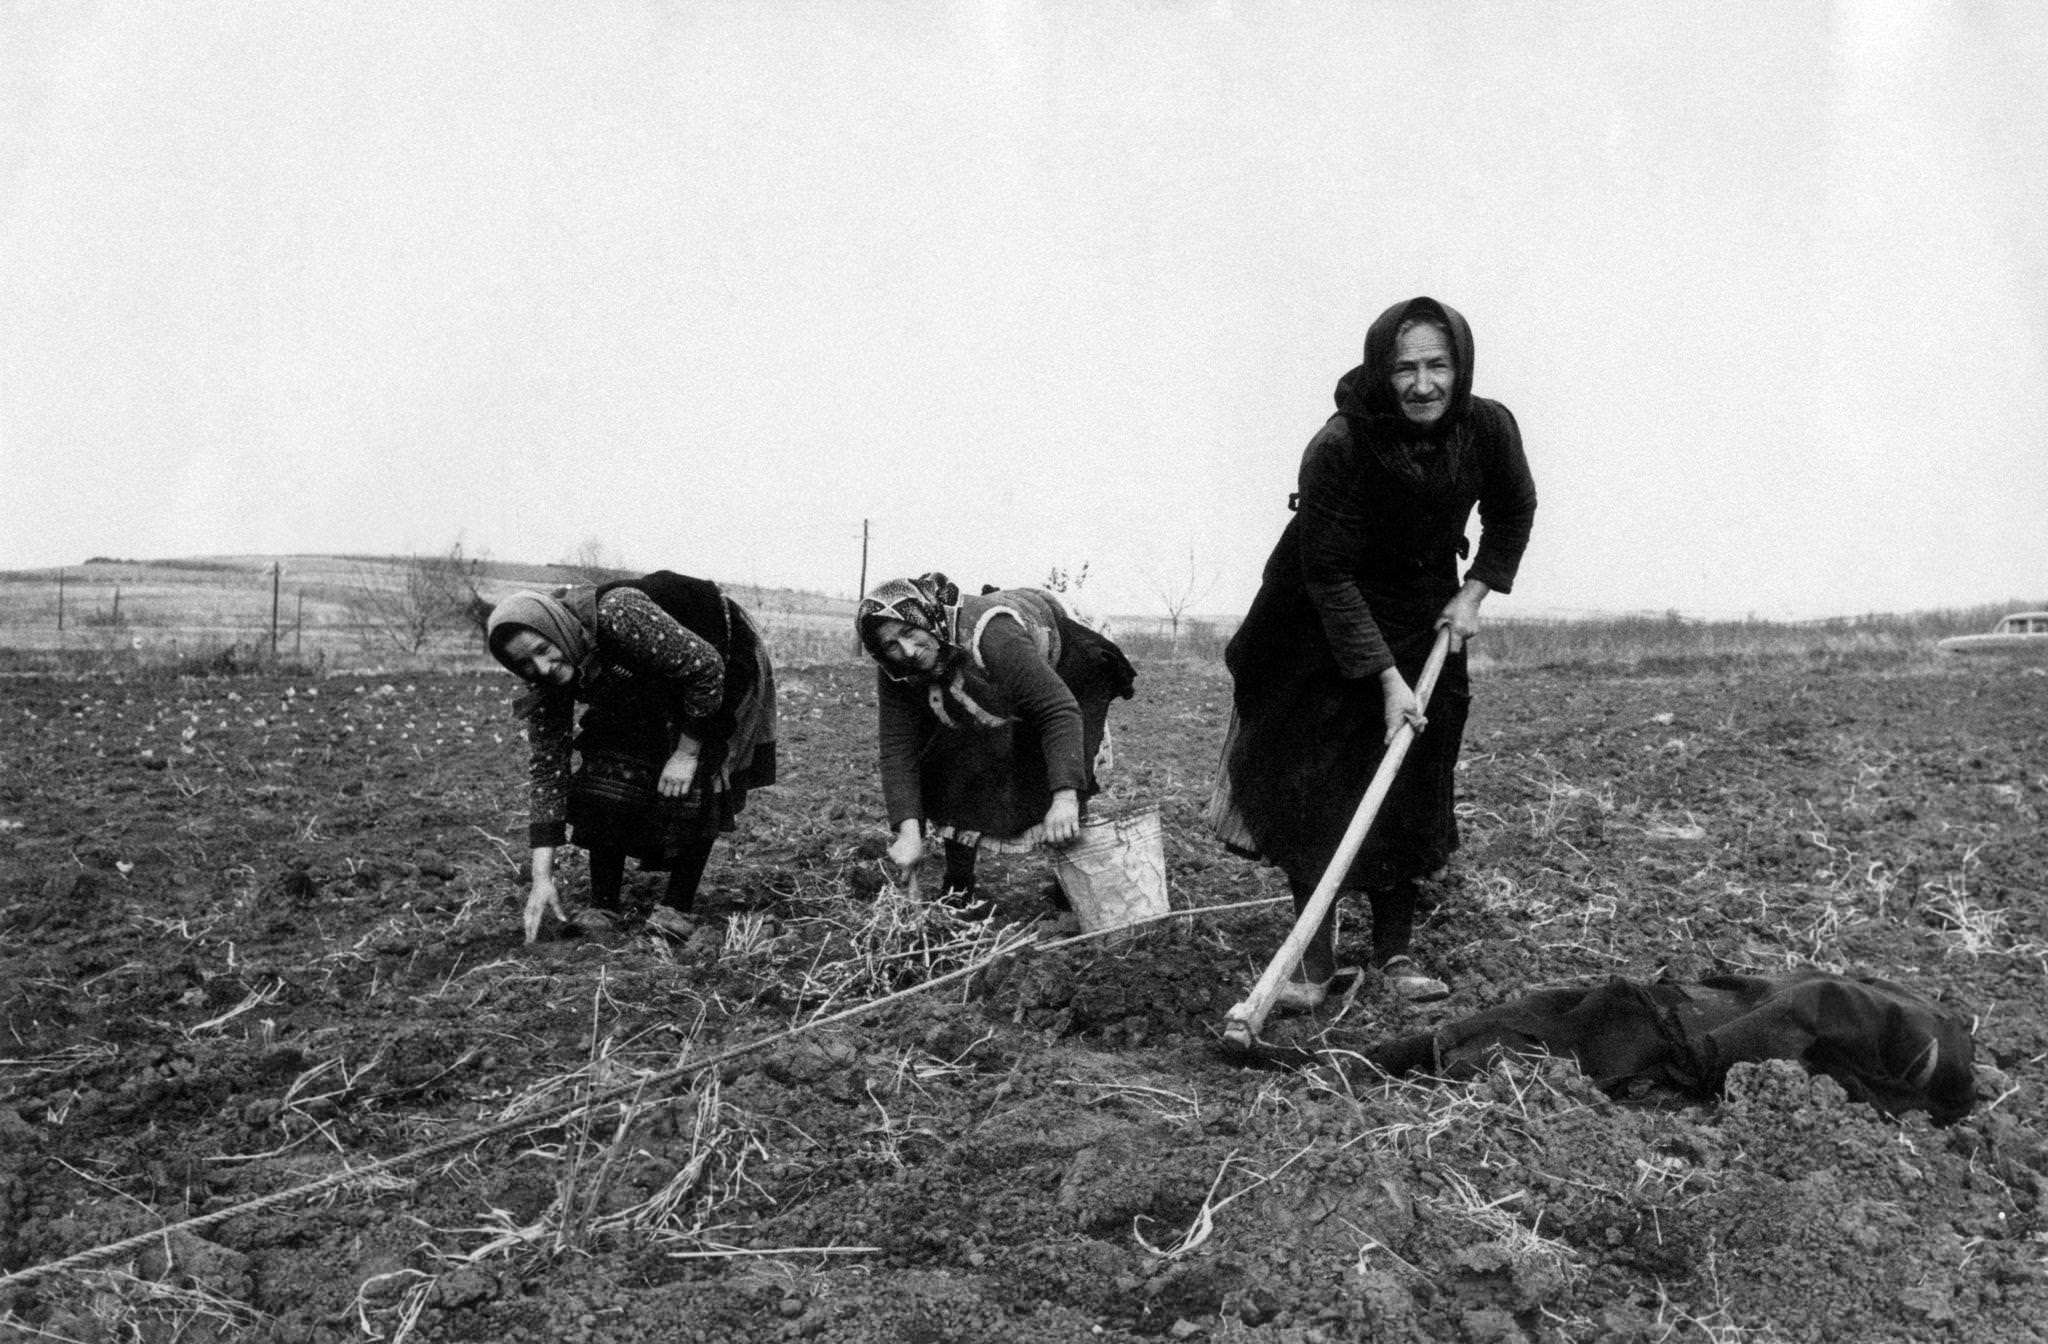 Three countrywomen at work turn over and spade a field, 20 km far from the capital city of Belgrade, Serbia, 1965